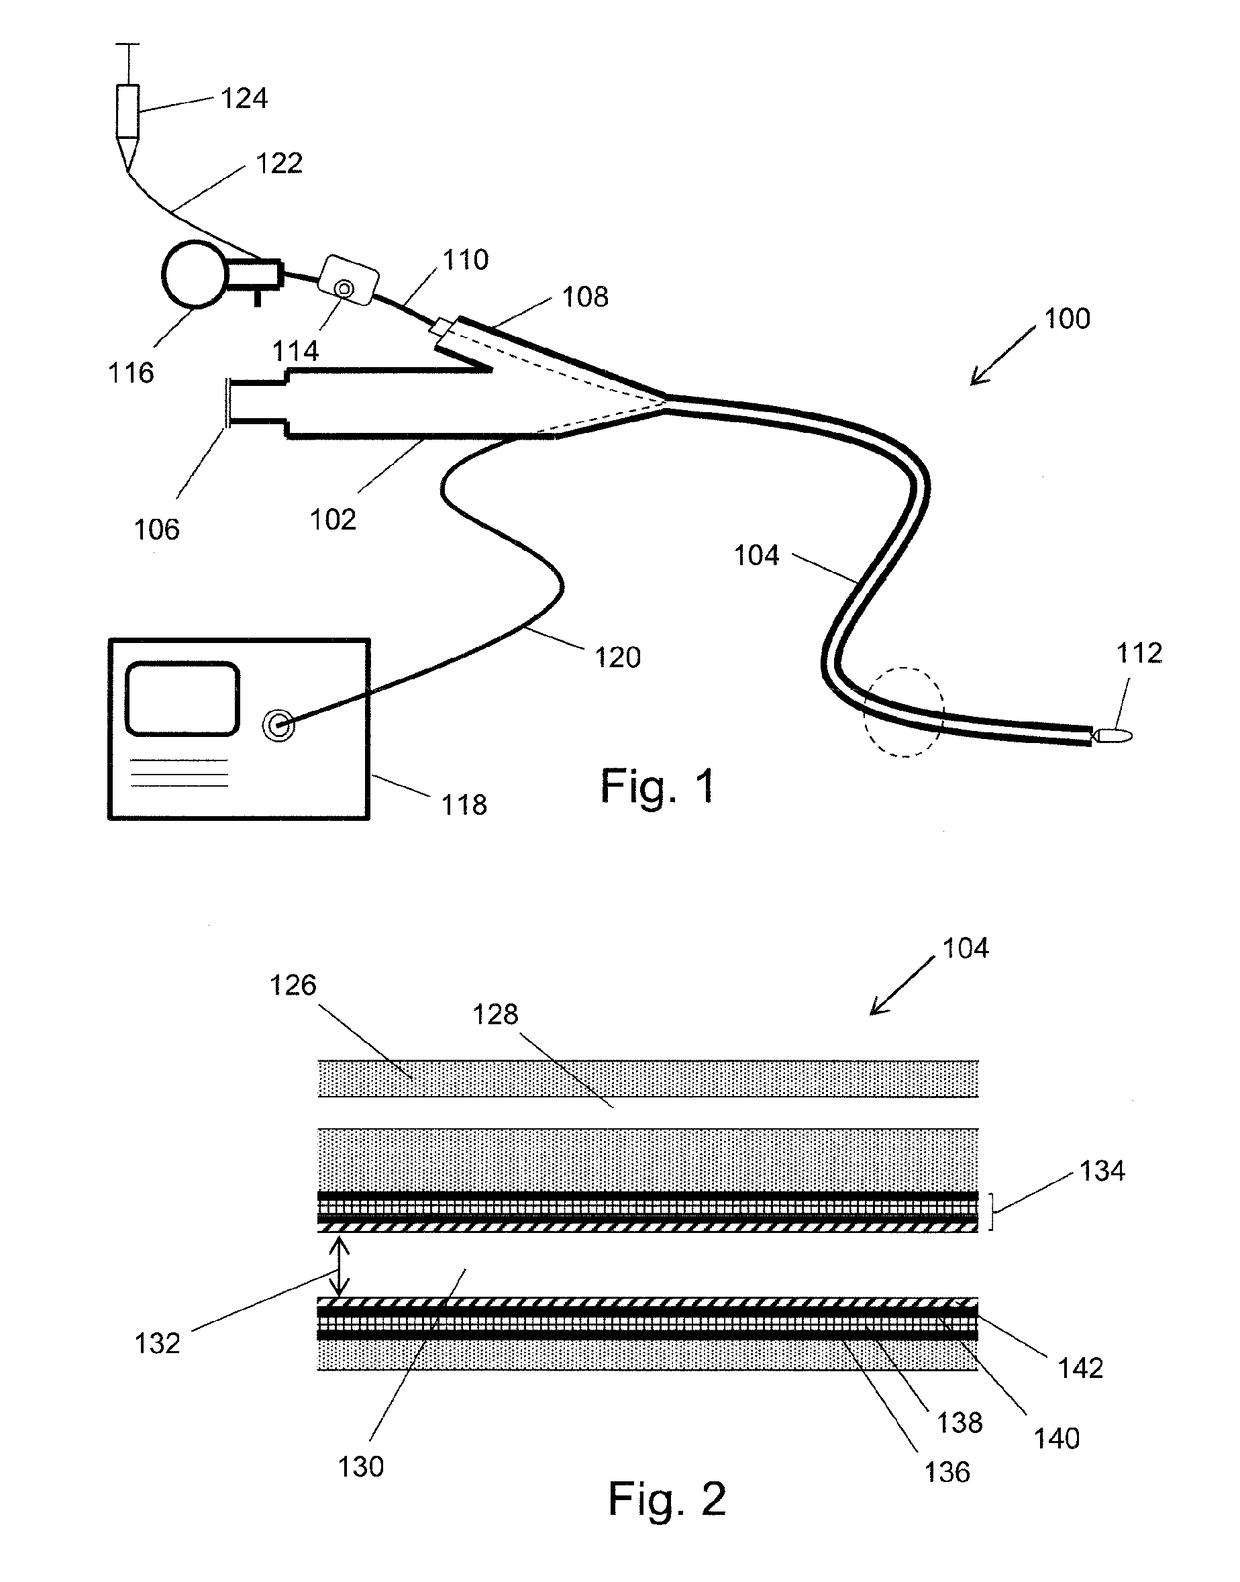 RF and/or microwave energy conveying structure, and an invasive electrosurgical scoping device incorporating the same